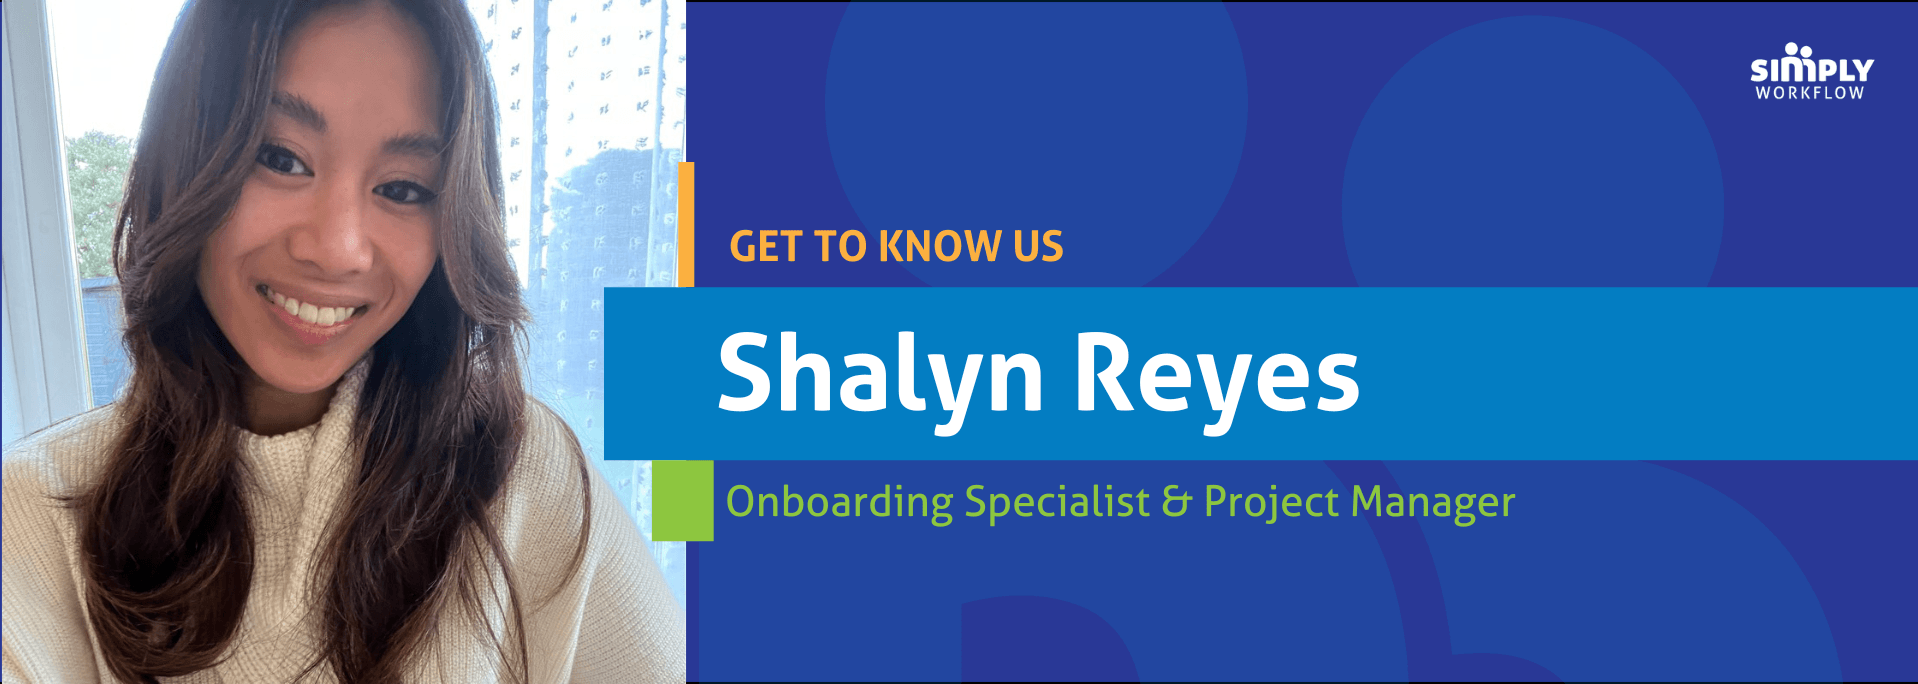 Shayln Reyes - Simply Workflow Get to Know Us